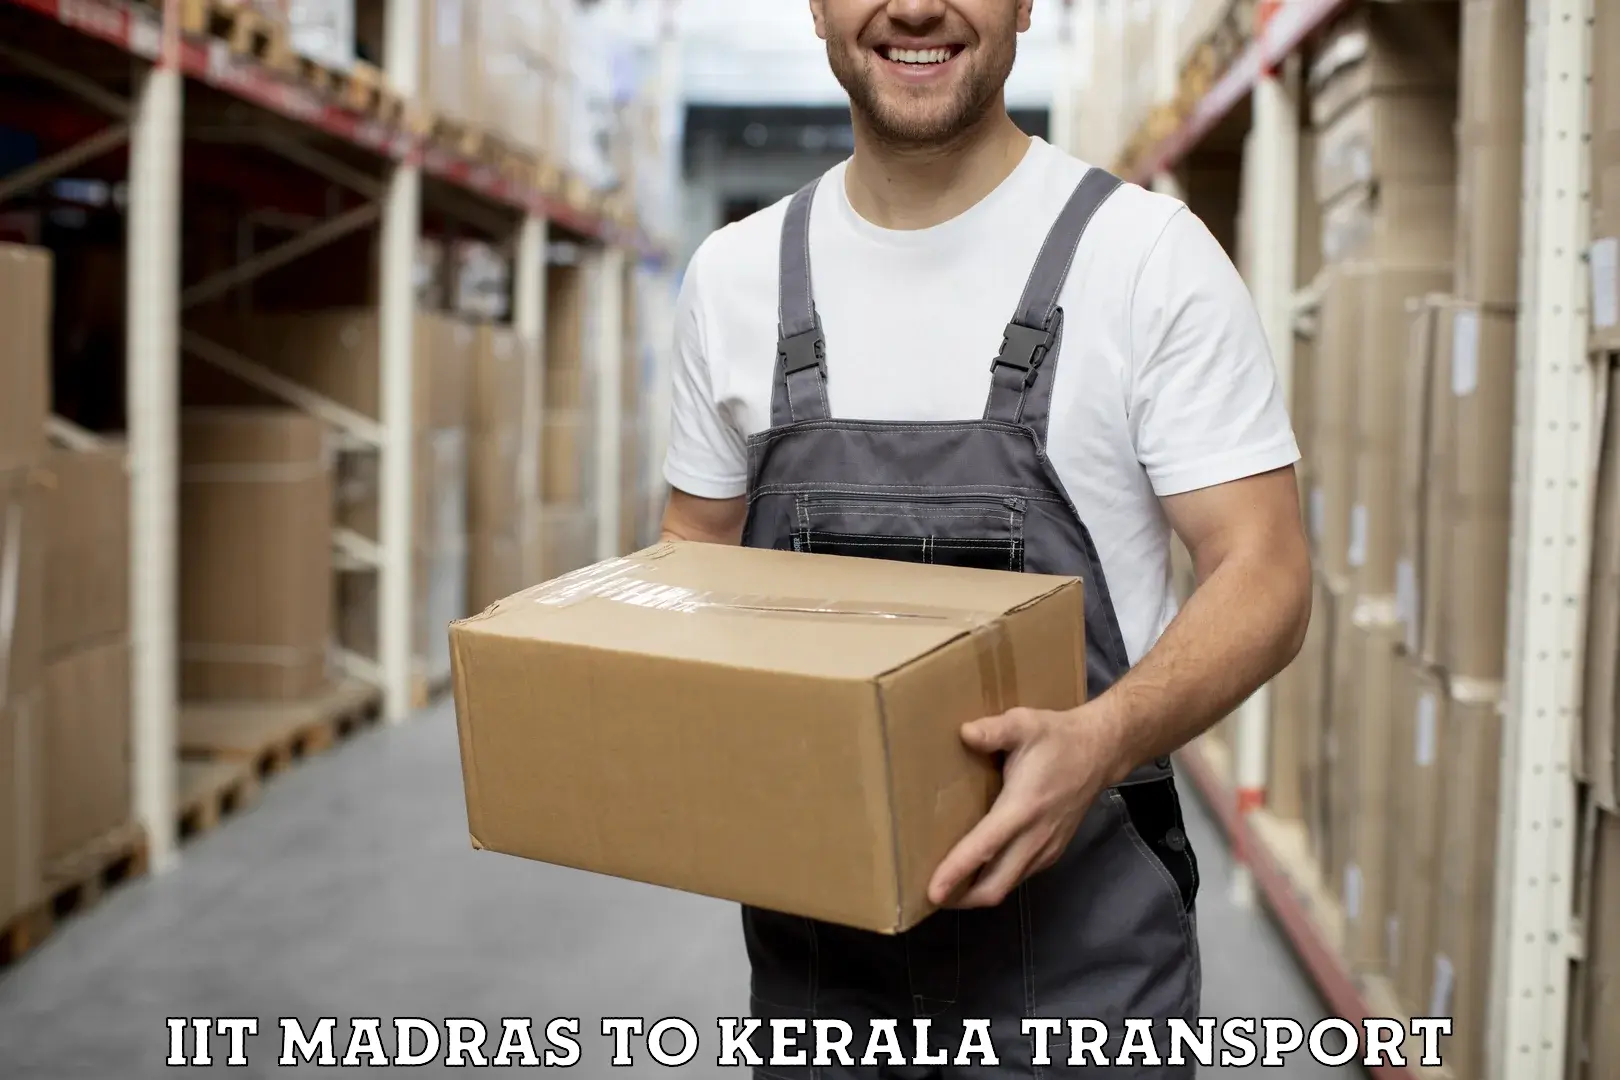 Two wheeler parcel service IIT Madras to Nallepilly